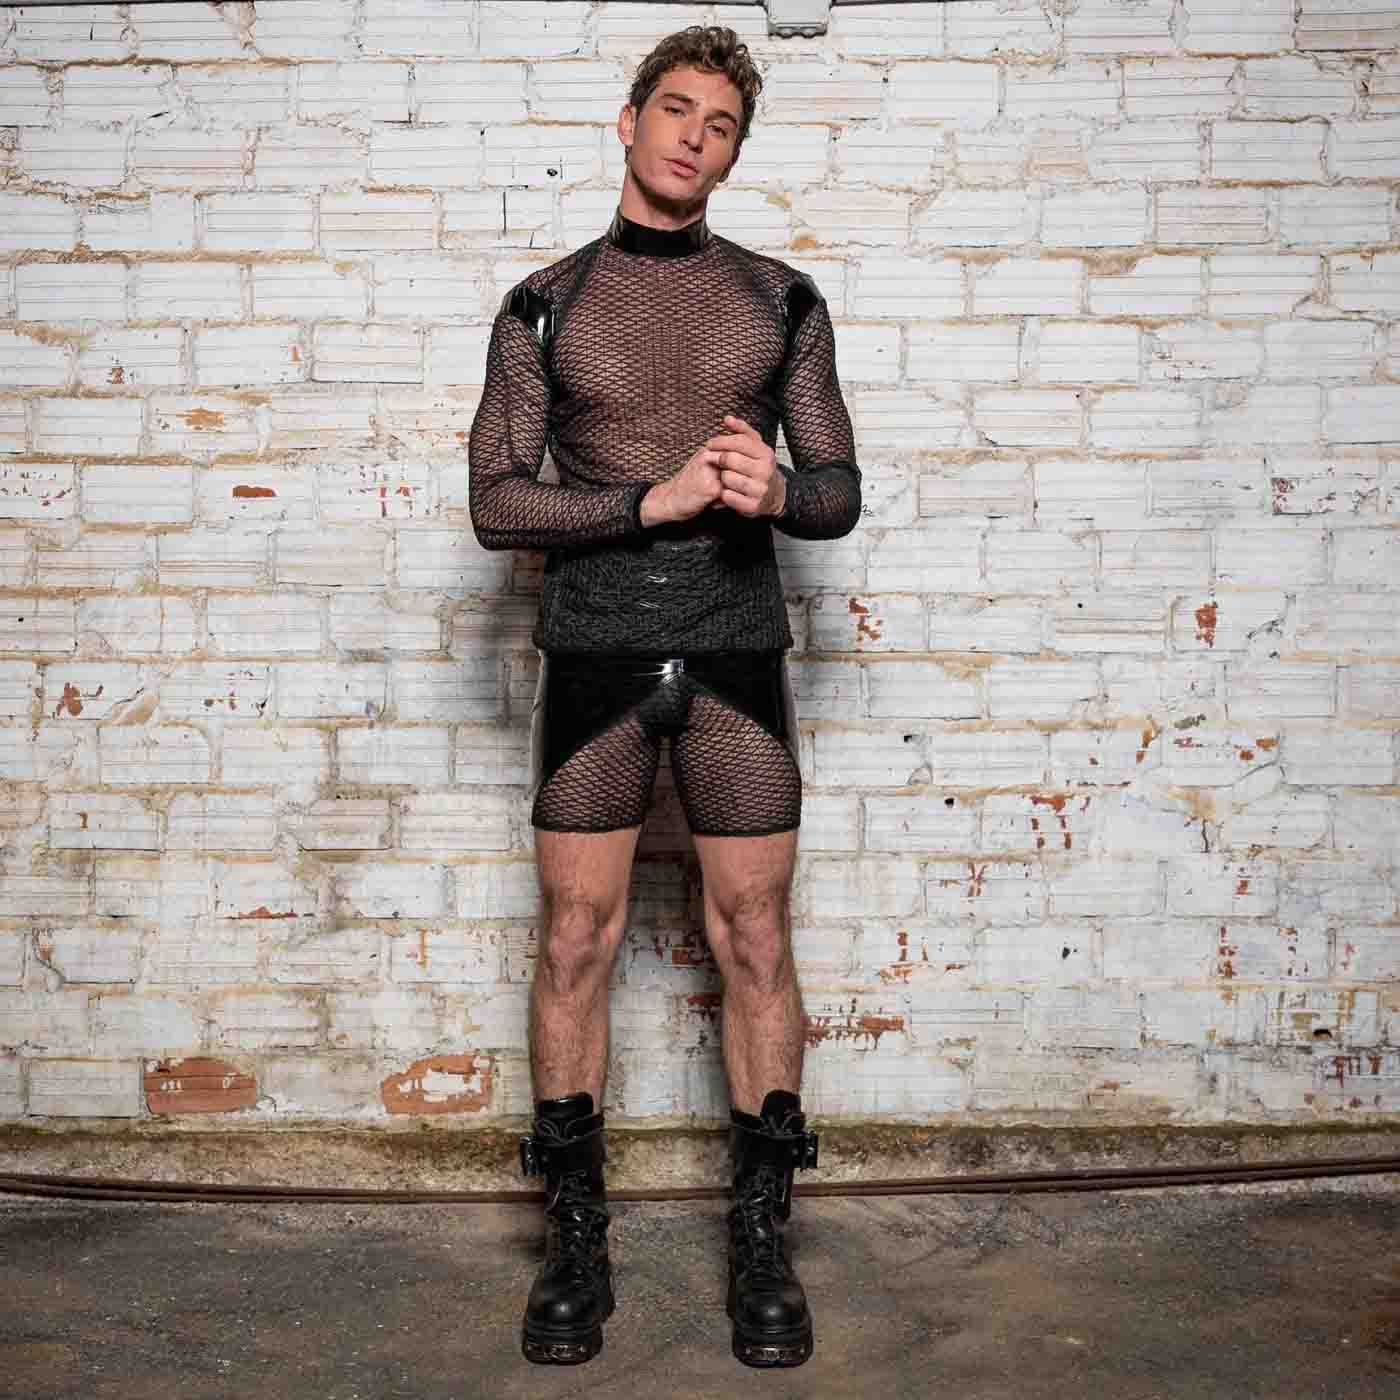 A model wearing the Leif Net & PatentT-Shirt with black patent and net shorts and black combat boots, front view.